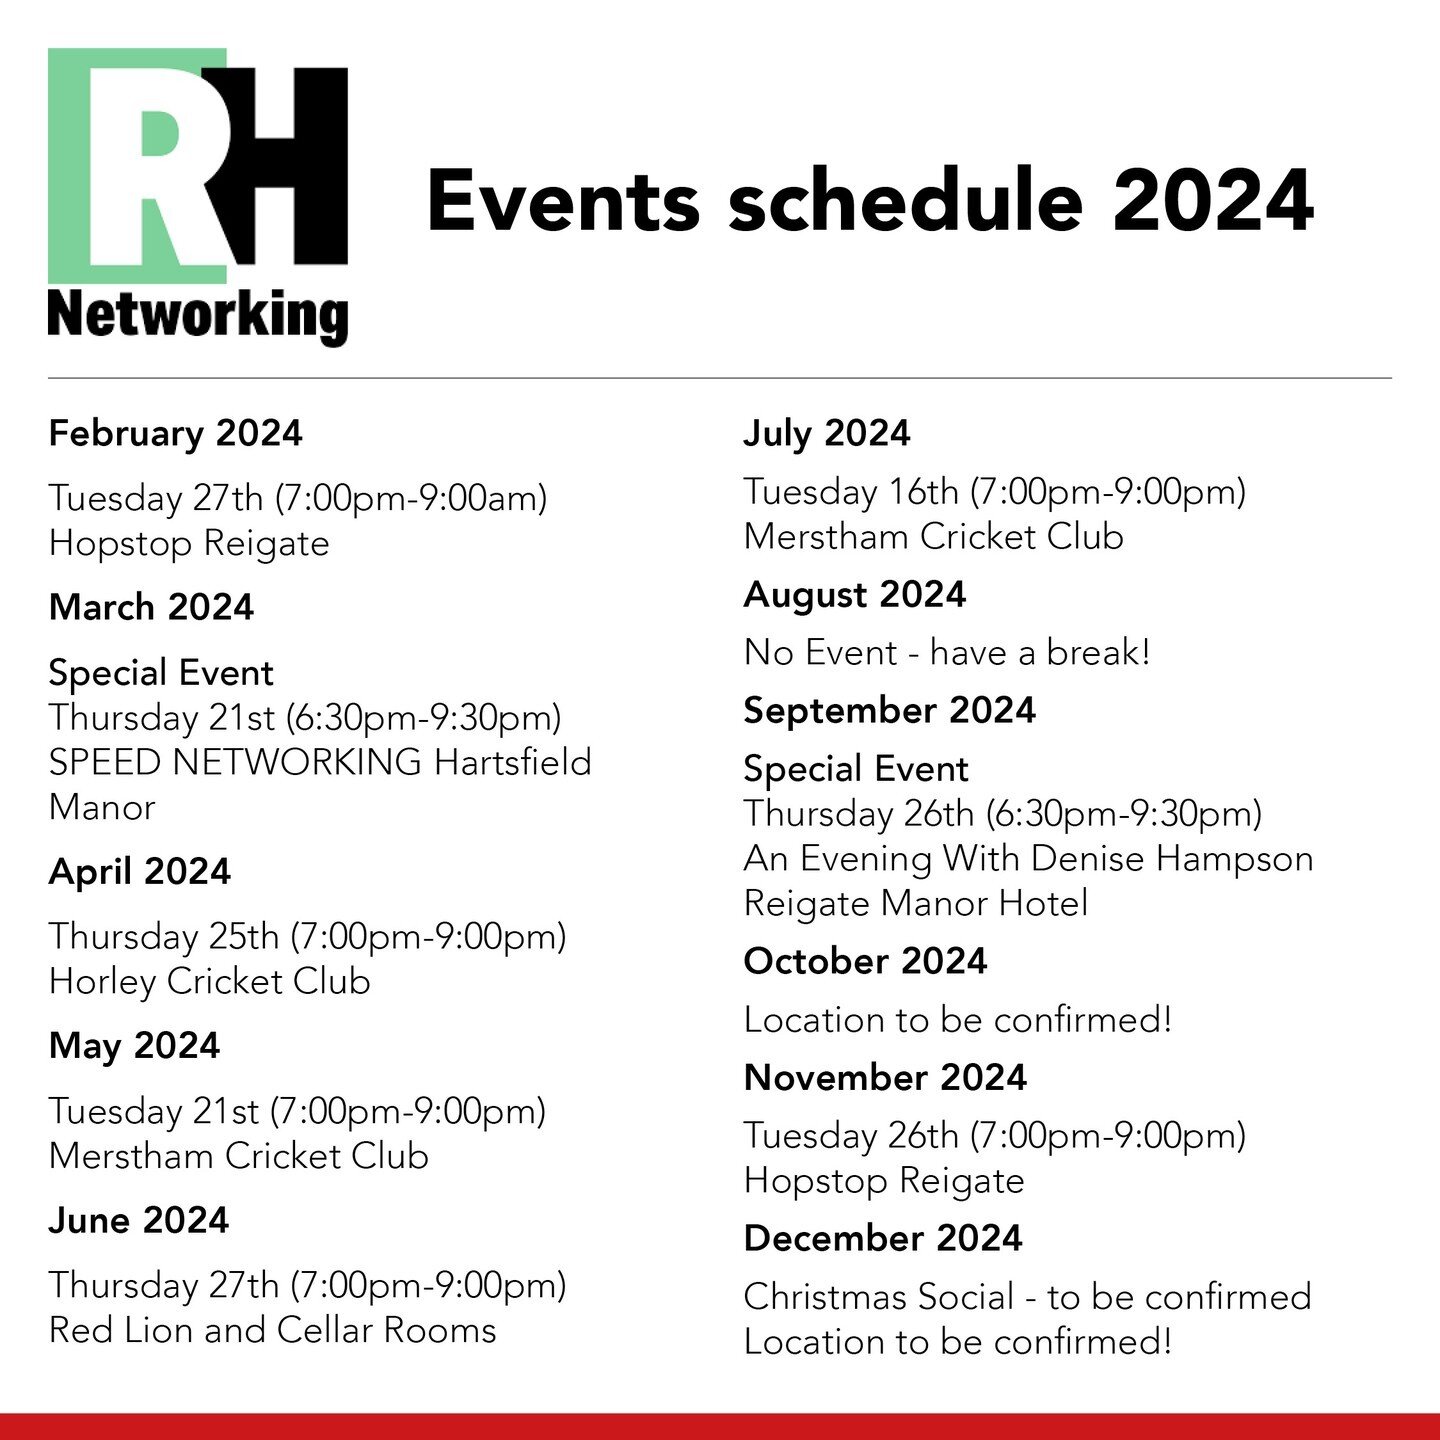 If you are looking for new networking opportunities locally, our friends at @rh_networking have announced their calendar of events for 2024.
#Netwkorking #BusinessNetworking #RHNetworking #Redhill

@rbbcbusiness